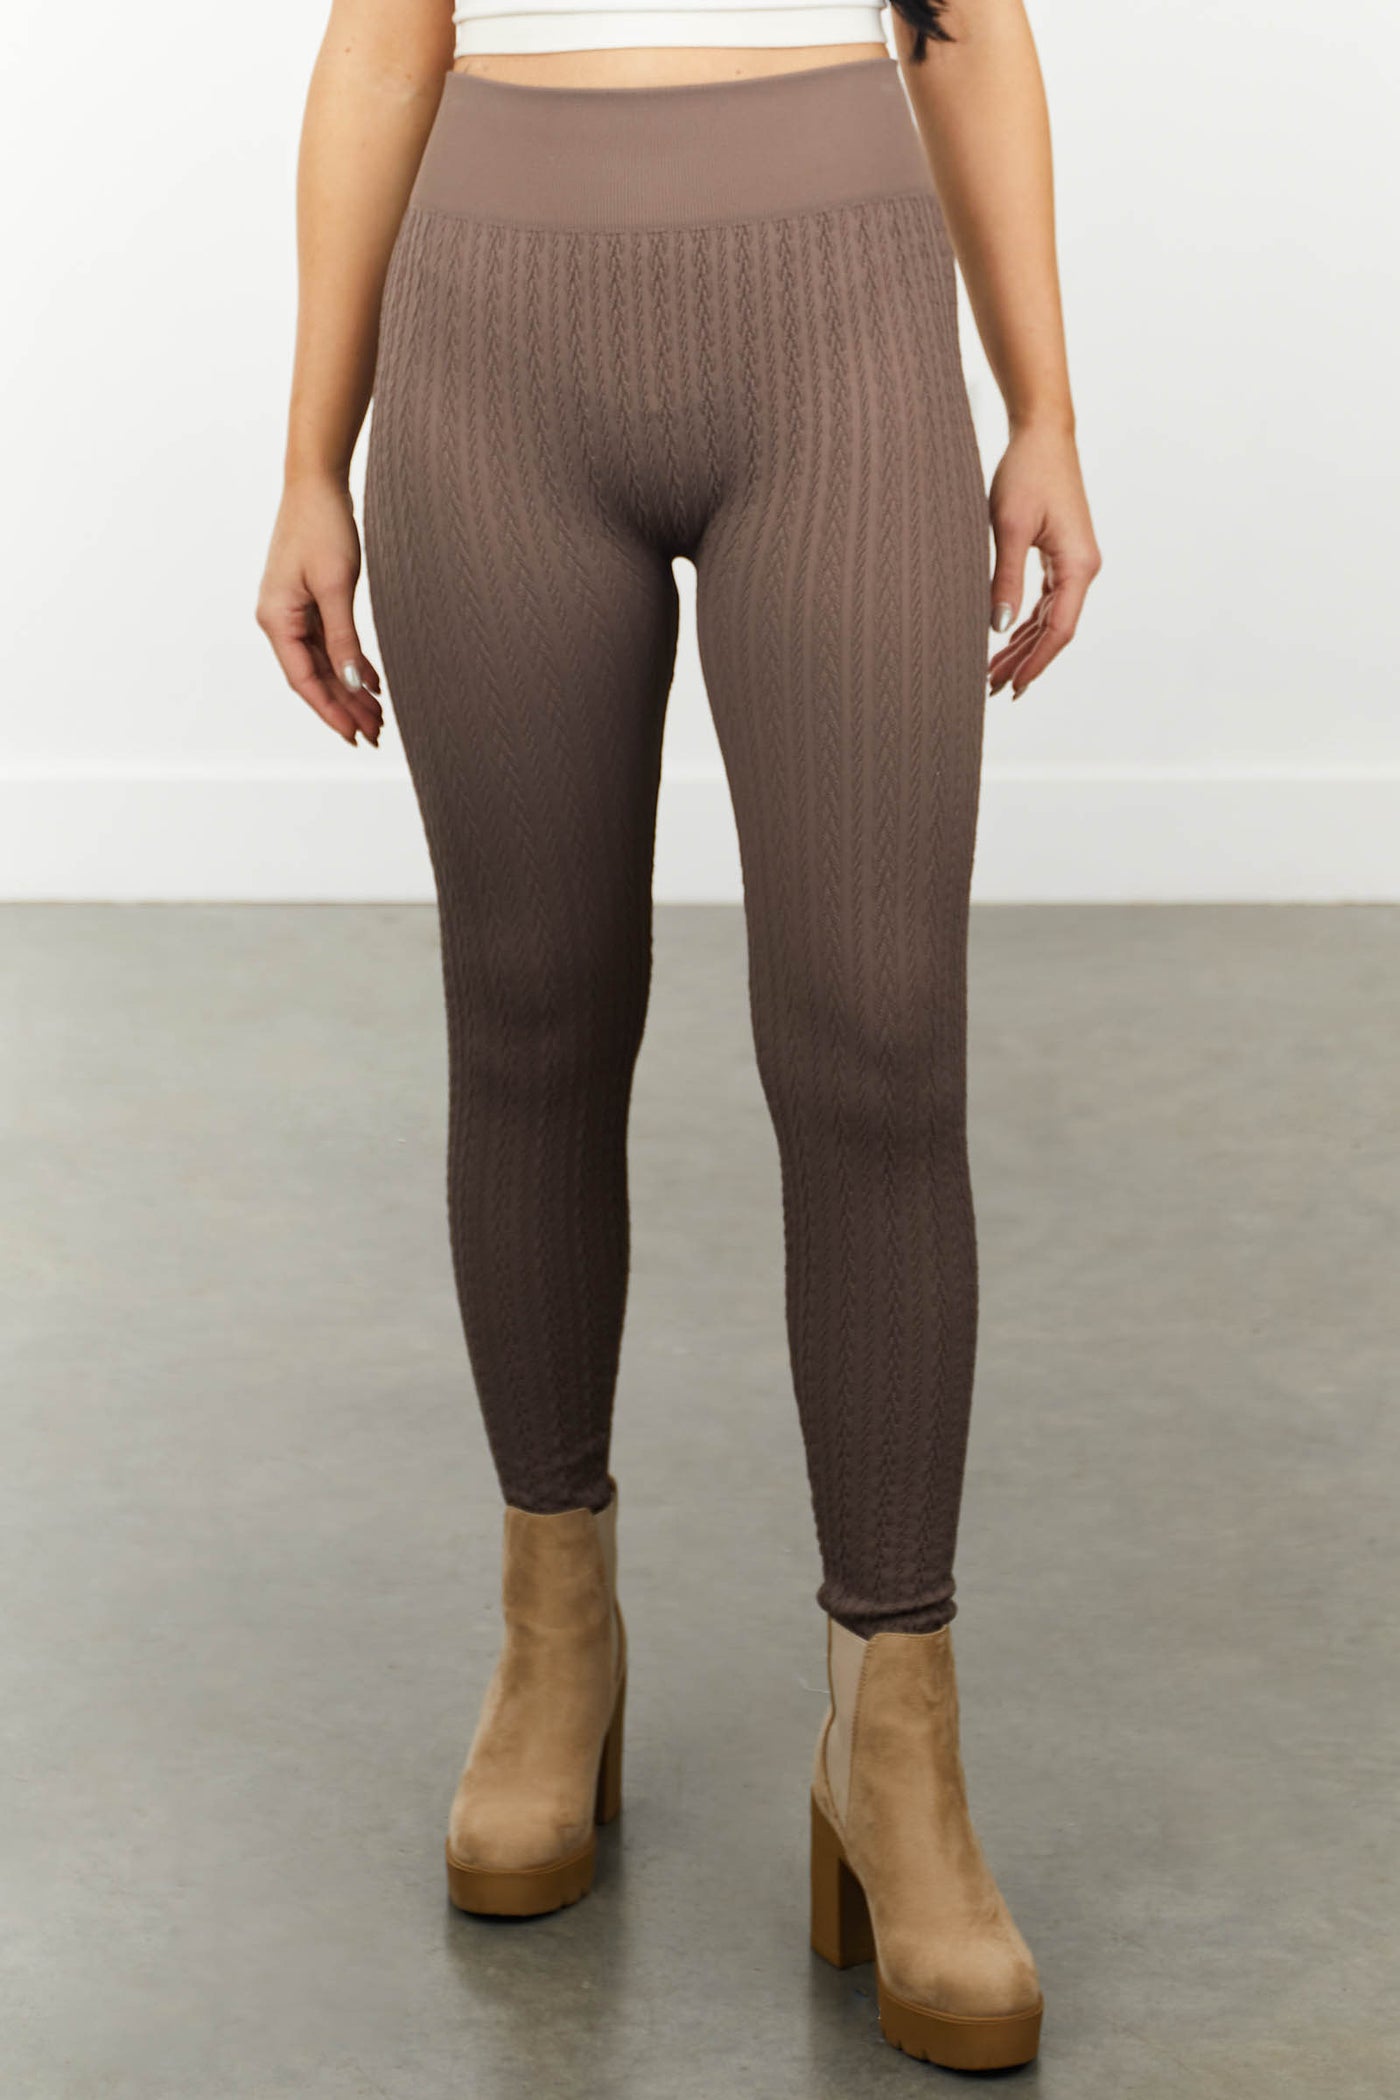 Bare Cable Knit Seamless Leggings & Reviews